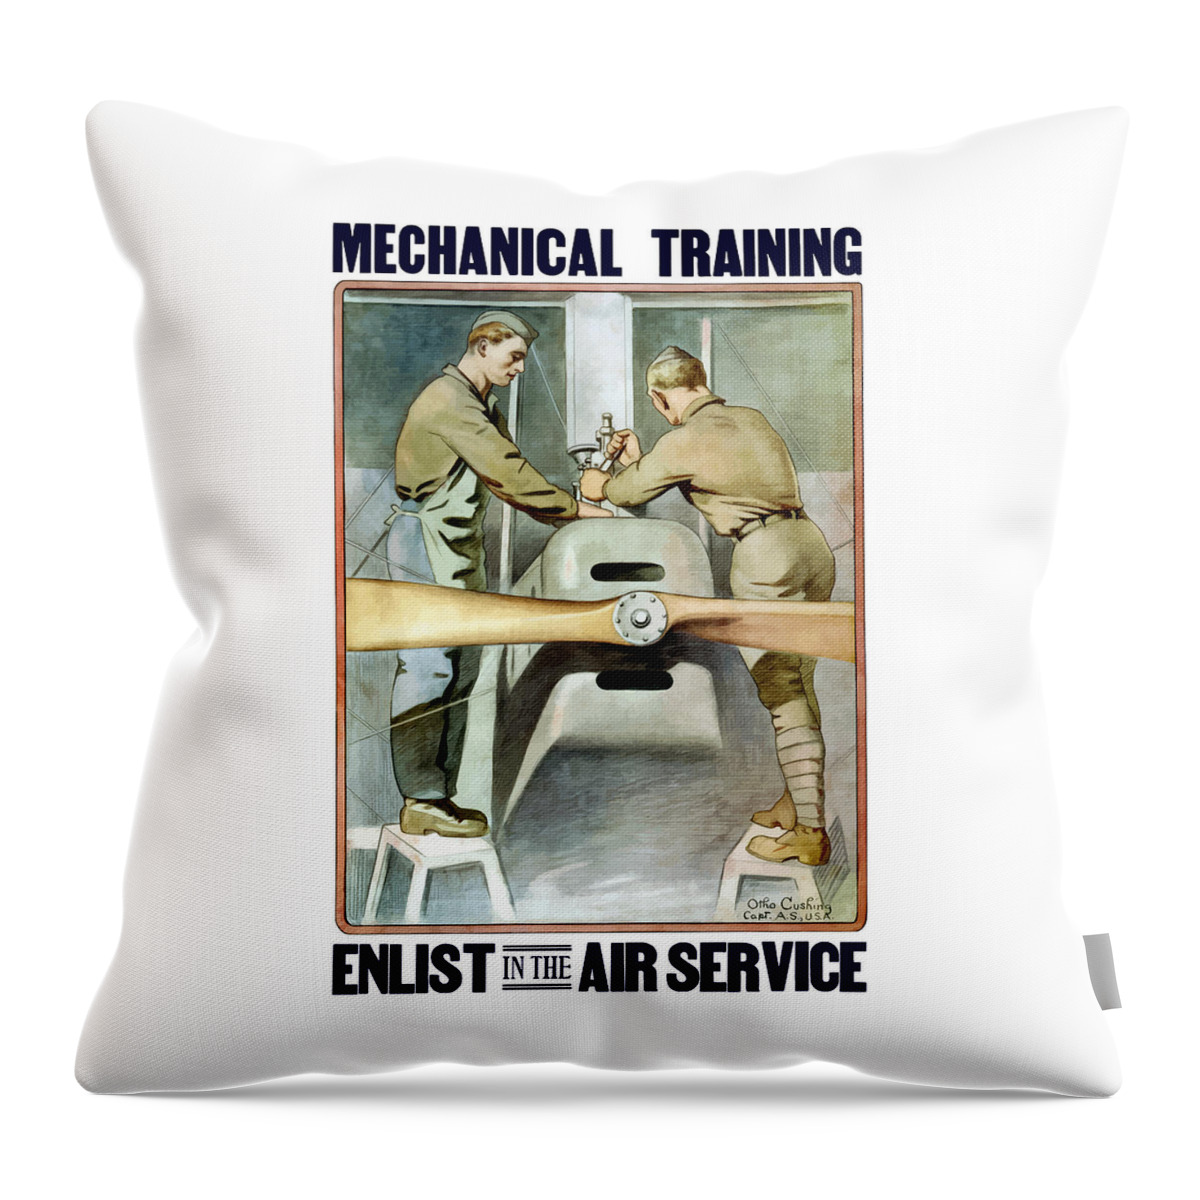 Ww1 Throw Pillow featuring the painting Mechanical Training - Enlist In The Air Service by War Is Hell Store